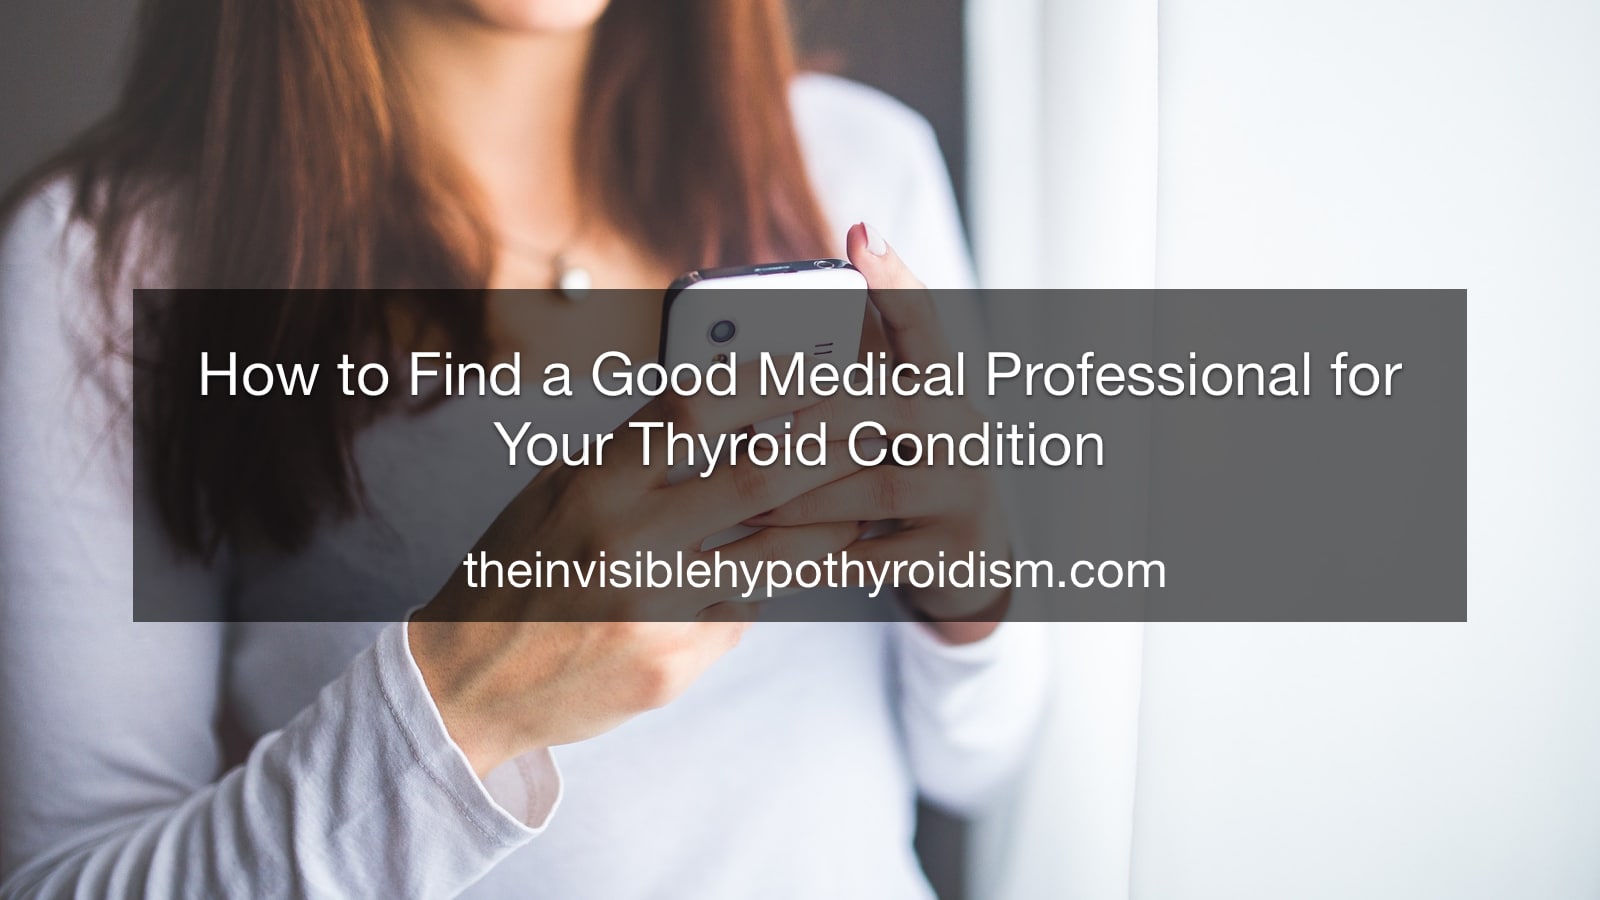 How to Find a Good Medical Professional for Your Thyroid Condition